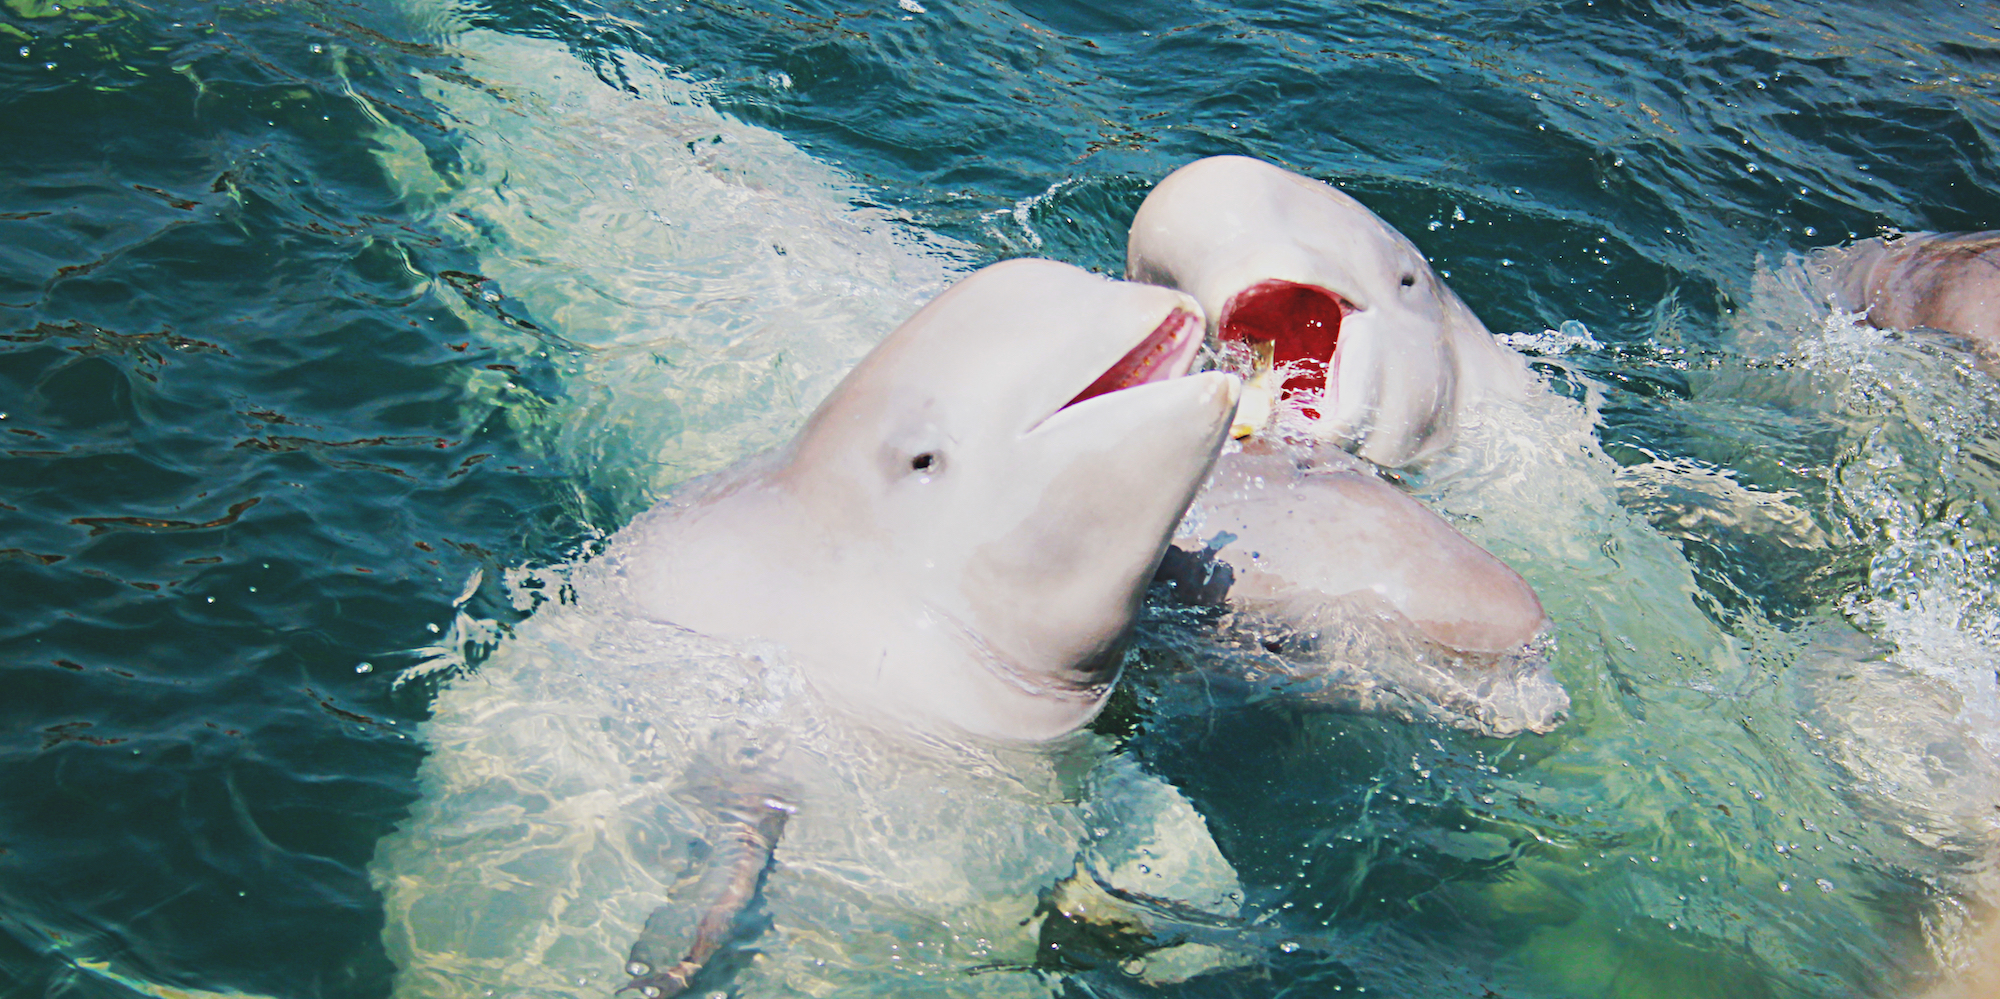 Two beluga whales touching each other with their mouths open